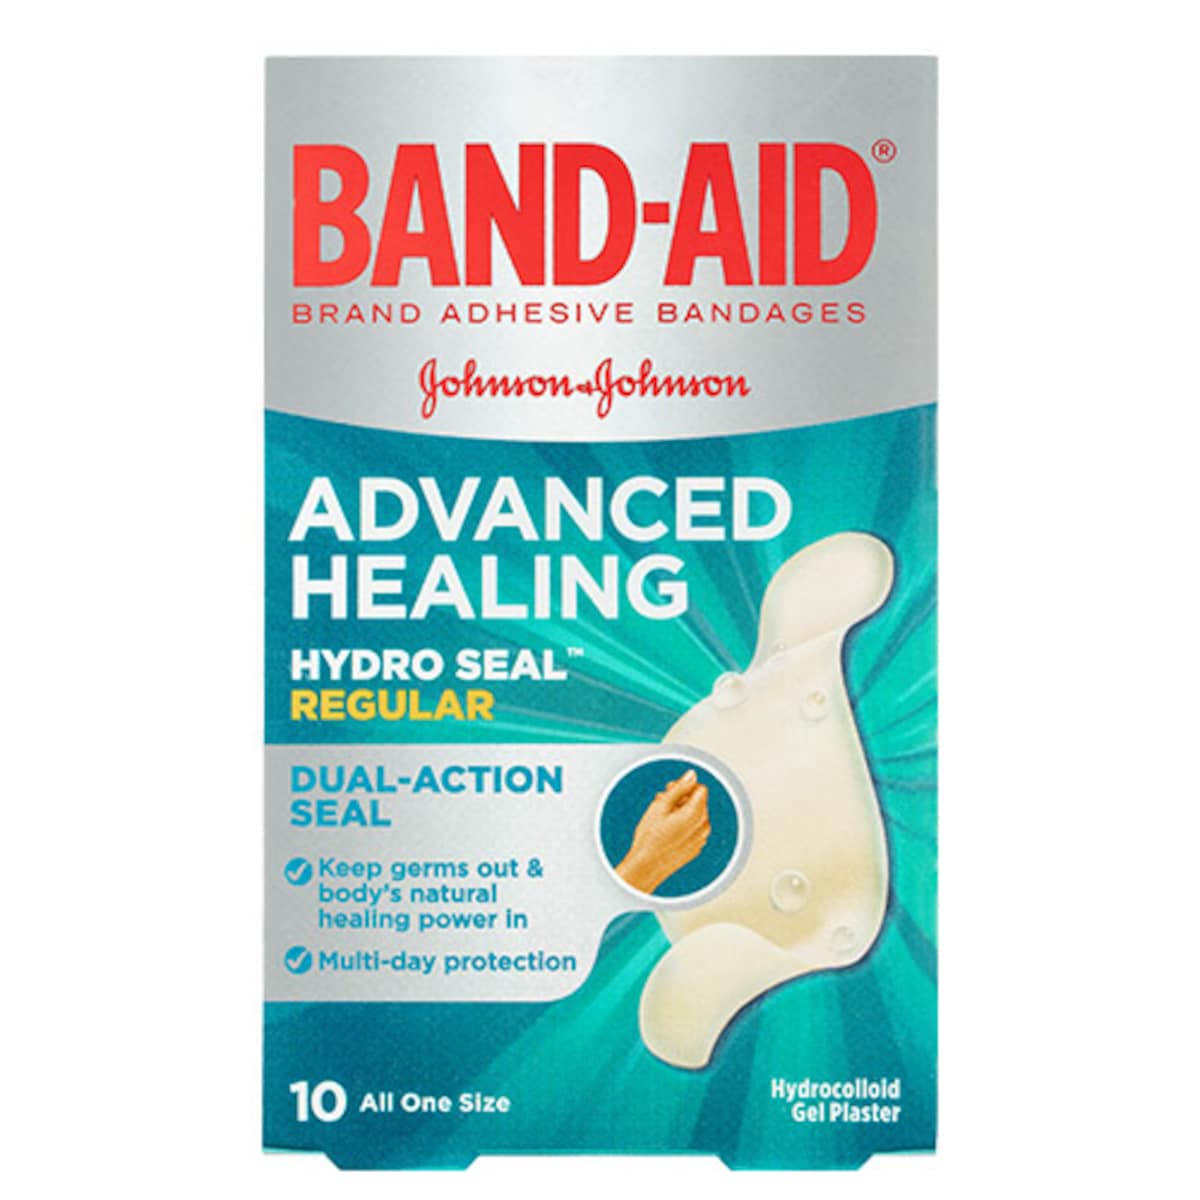 Buy Band-Aid Waterproof Tough Strips 20 Pack Online at Chemist